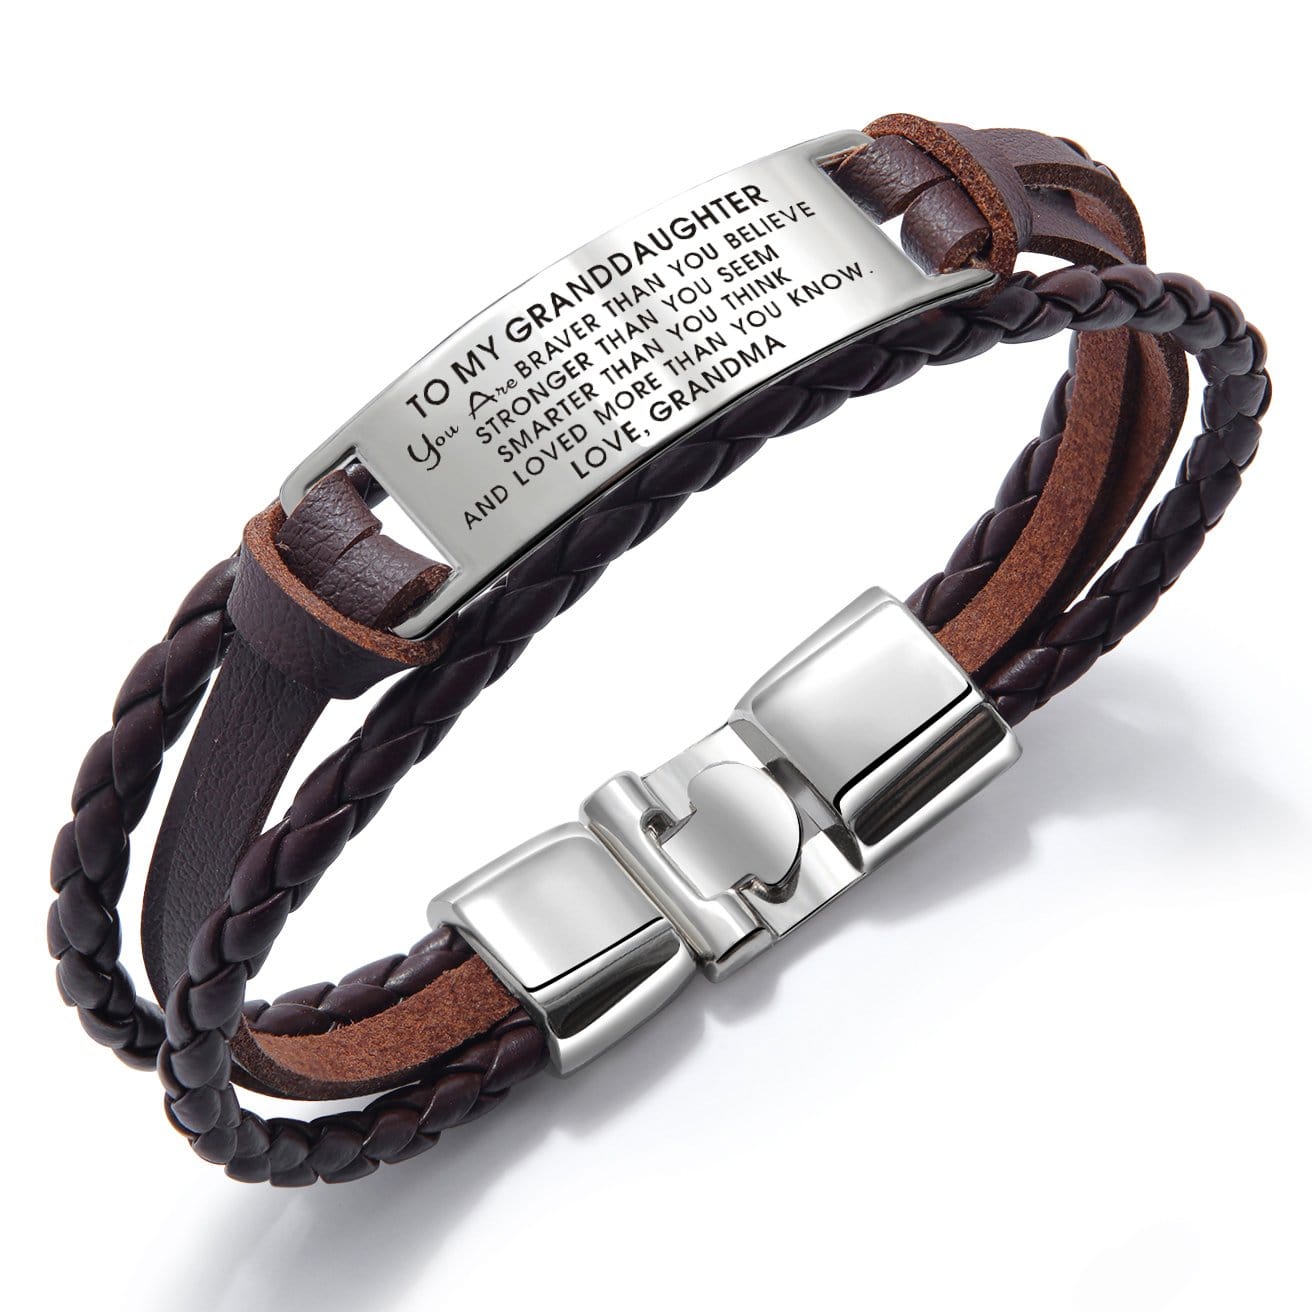 Bracelets Grandma To Granddaughter - You Are Loved More Than You Know Leather Bracelet Brown GiveMe-Gifts